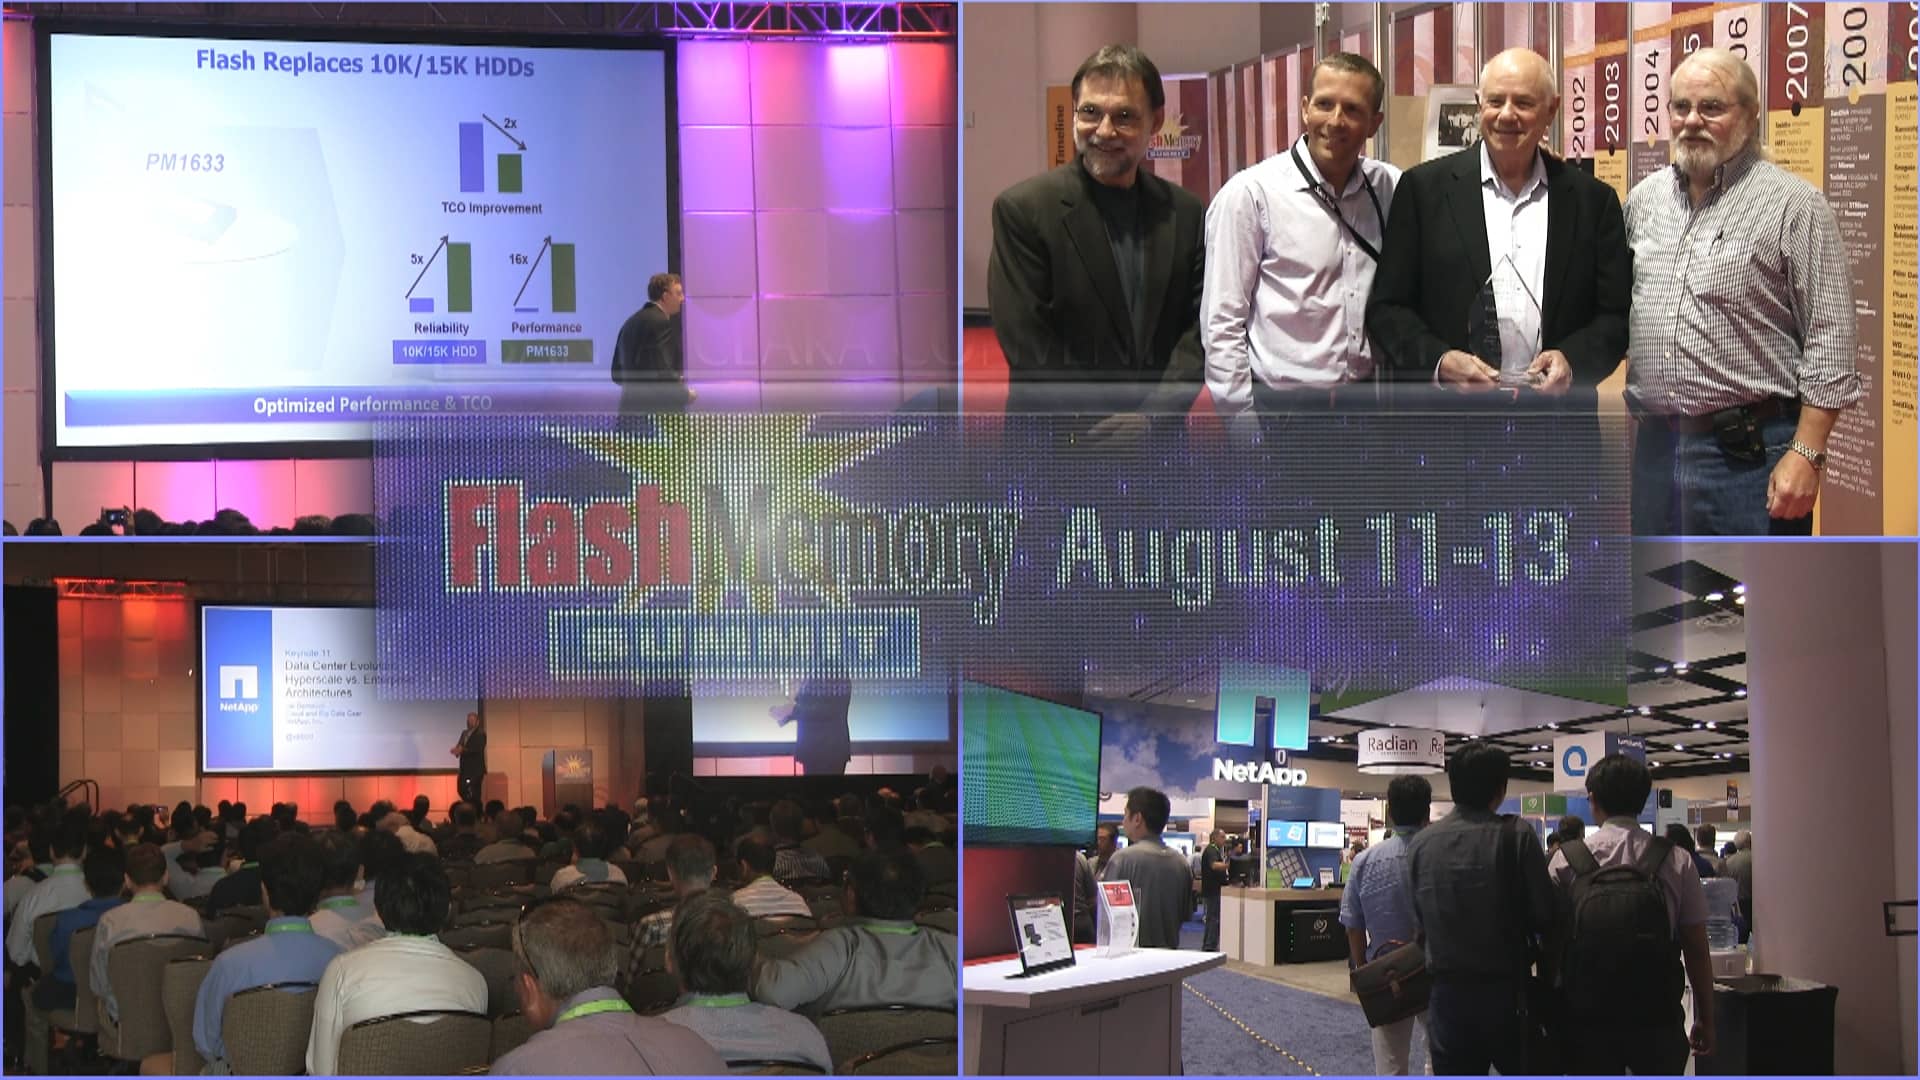 Flash: Driving New Applications & Performance – Highlights of the 2015 Flash Memory Summit